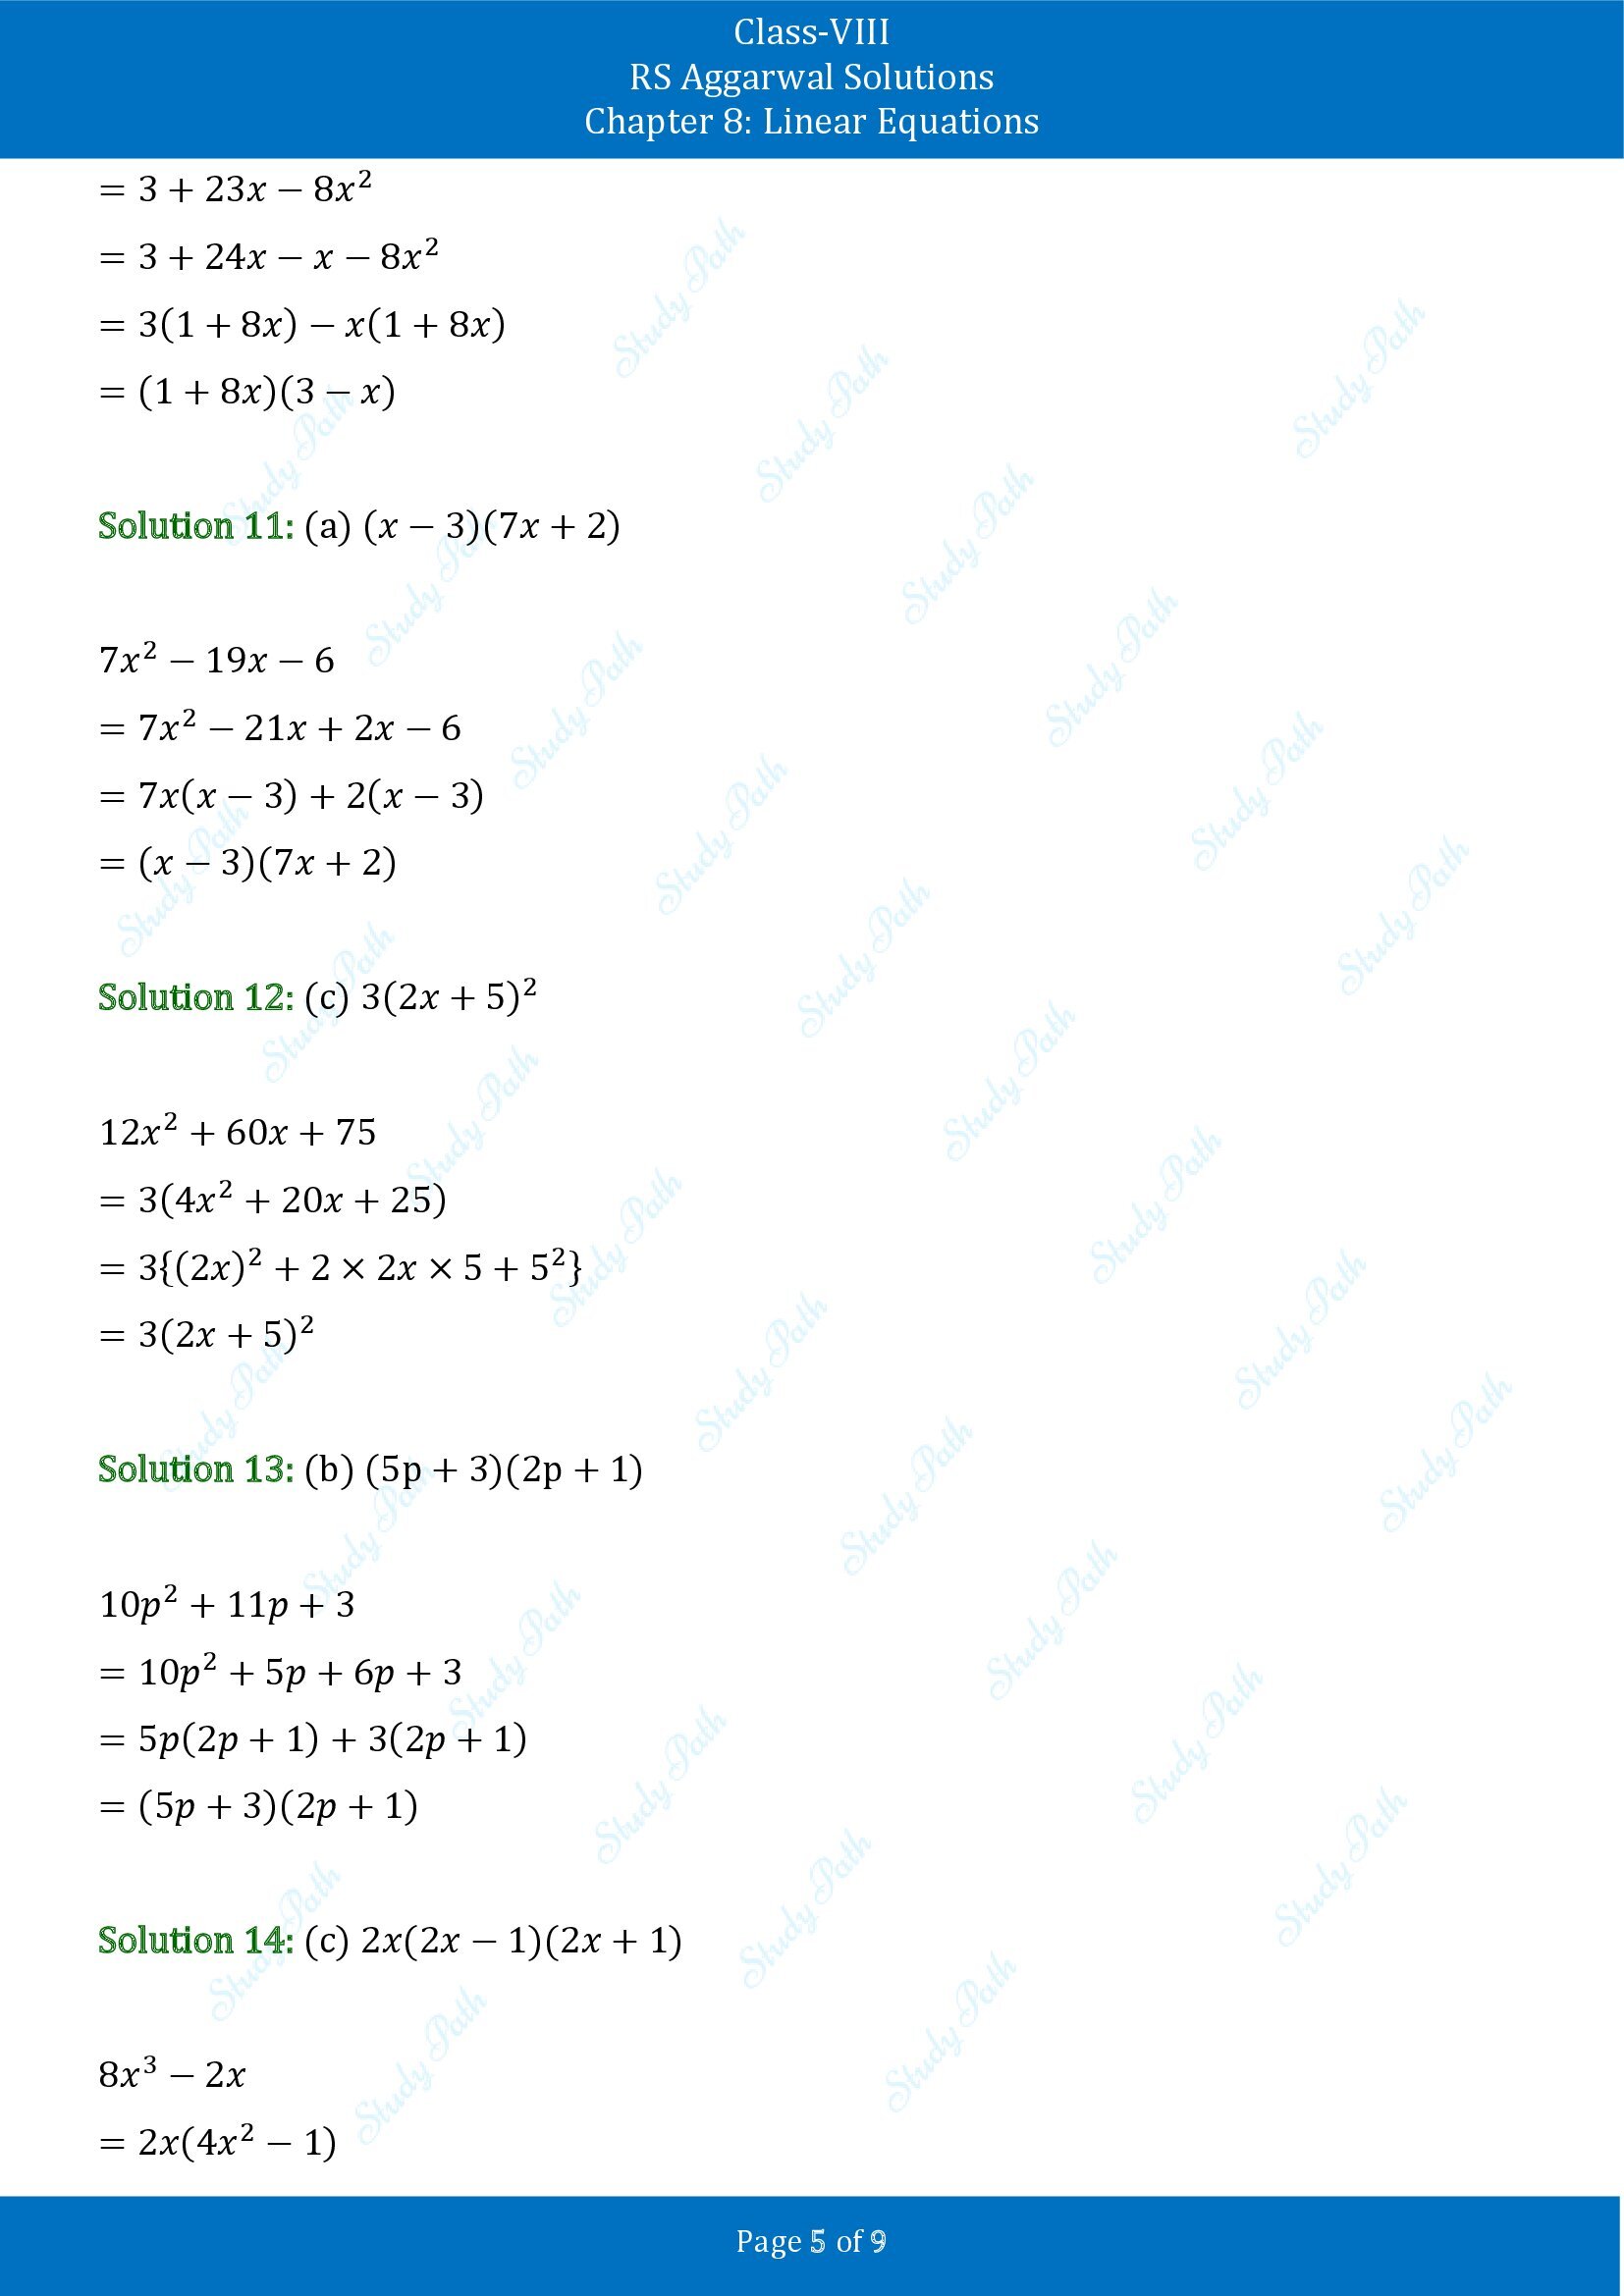 RS Aggarwal Solutions Class 8 Chapter 8 Linear Equations Test Paper 00005